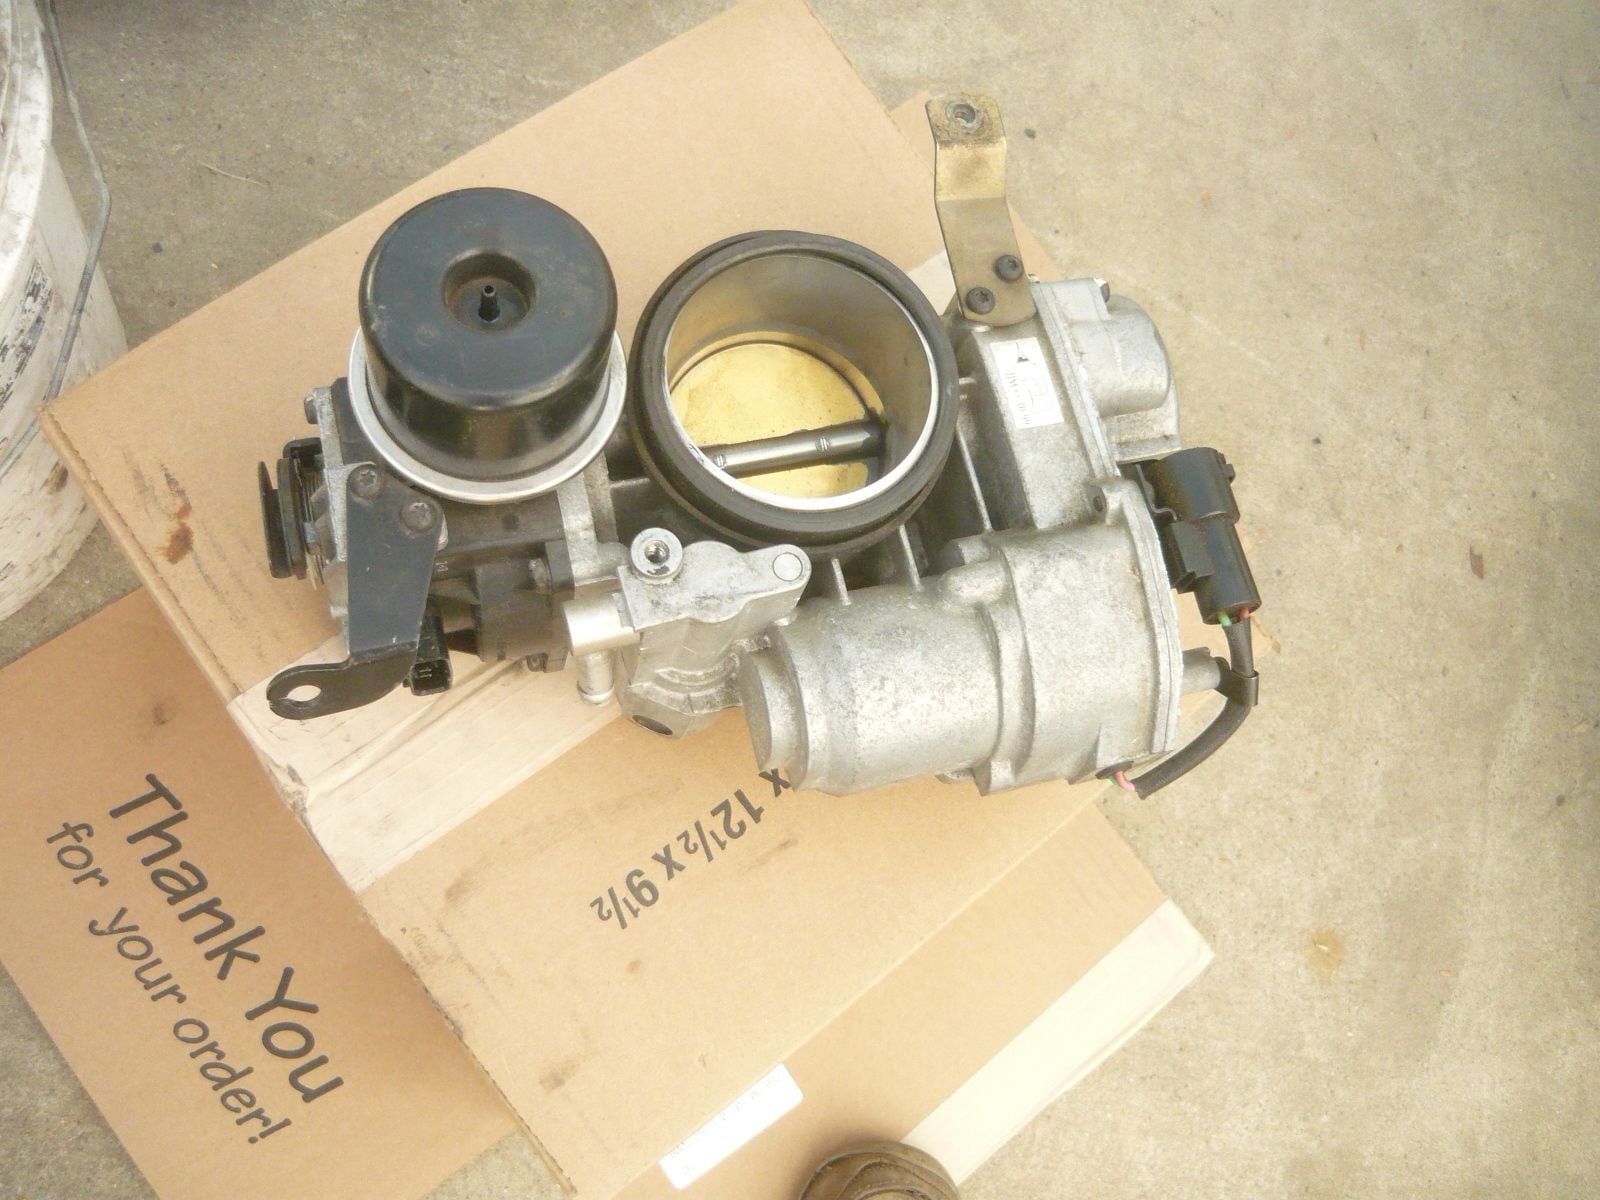 Engine - Electrical - XK8 1997 ECM and Throttle Body - Good Used- From Perfectly Running/Driving Engine - Used - 1997 Jaguar XK8 - San Francisco, CA 95032, United States